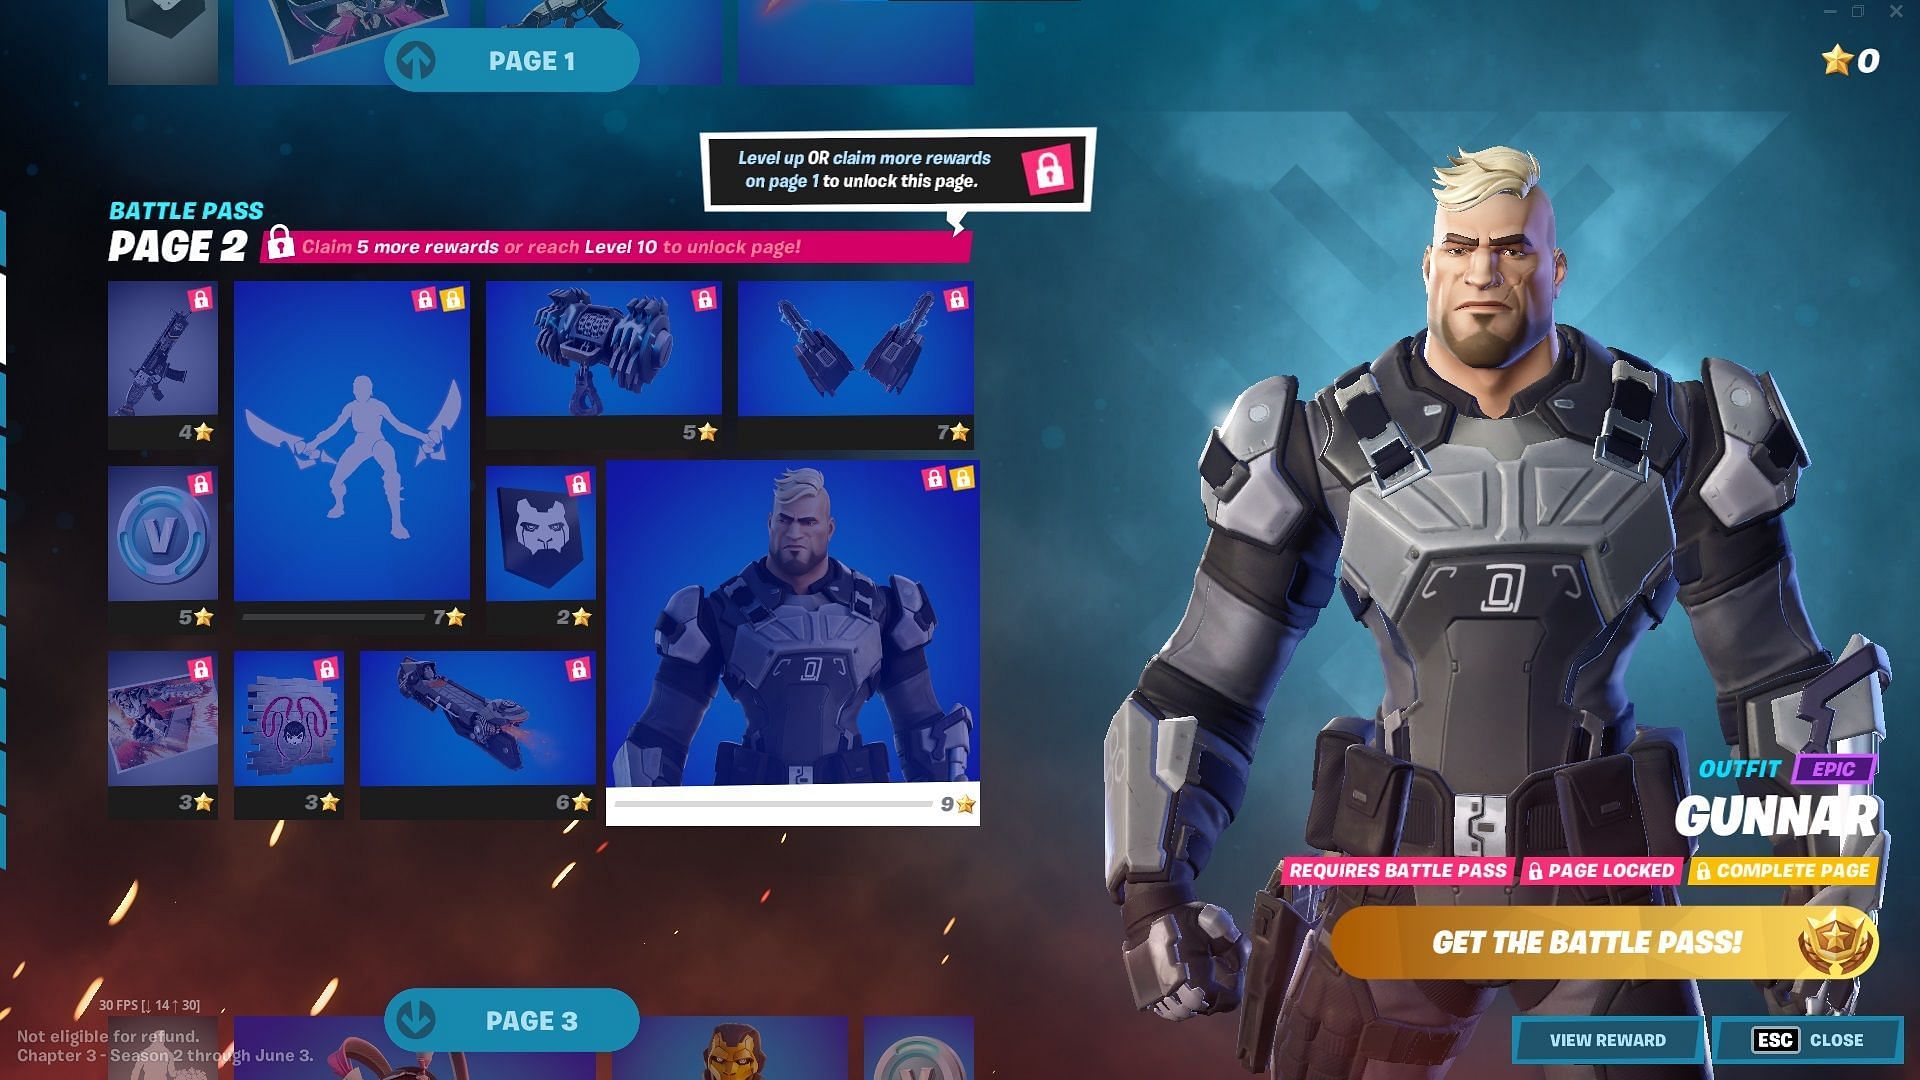 Chapter 3 Season 2 Battle Pass page 2 with 100 free V-Bucks (Image via Epic Games)